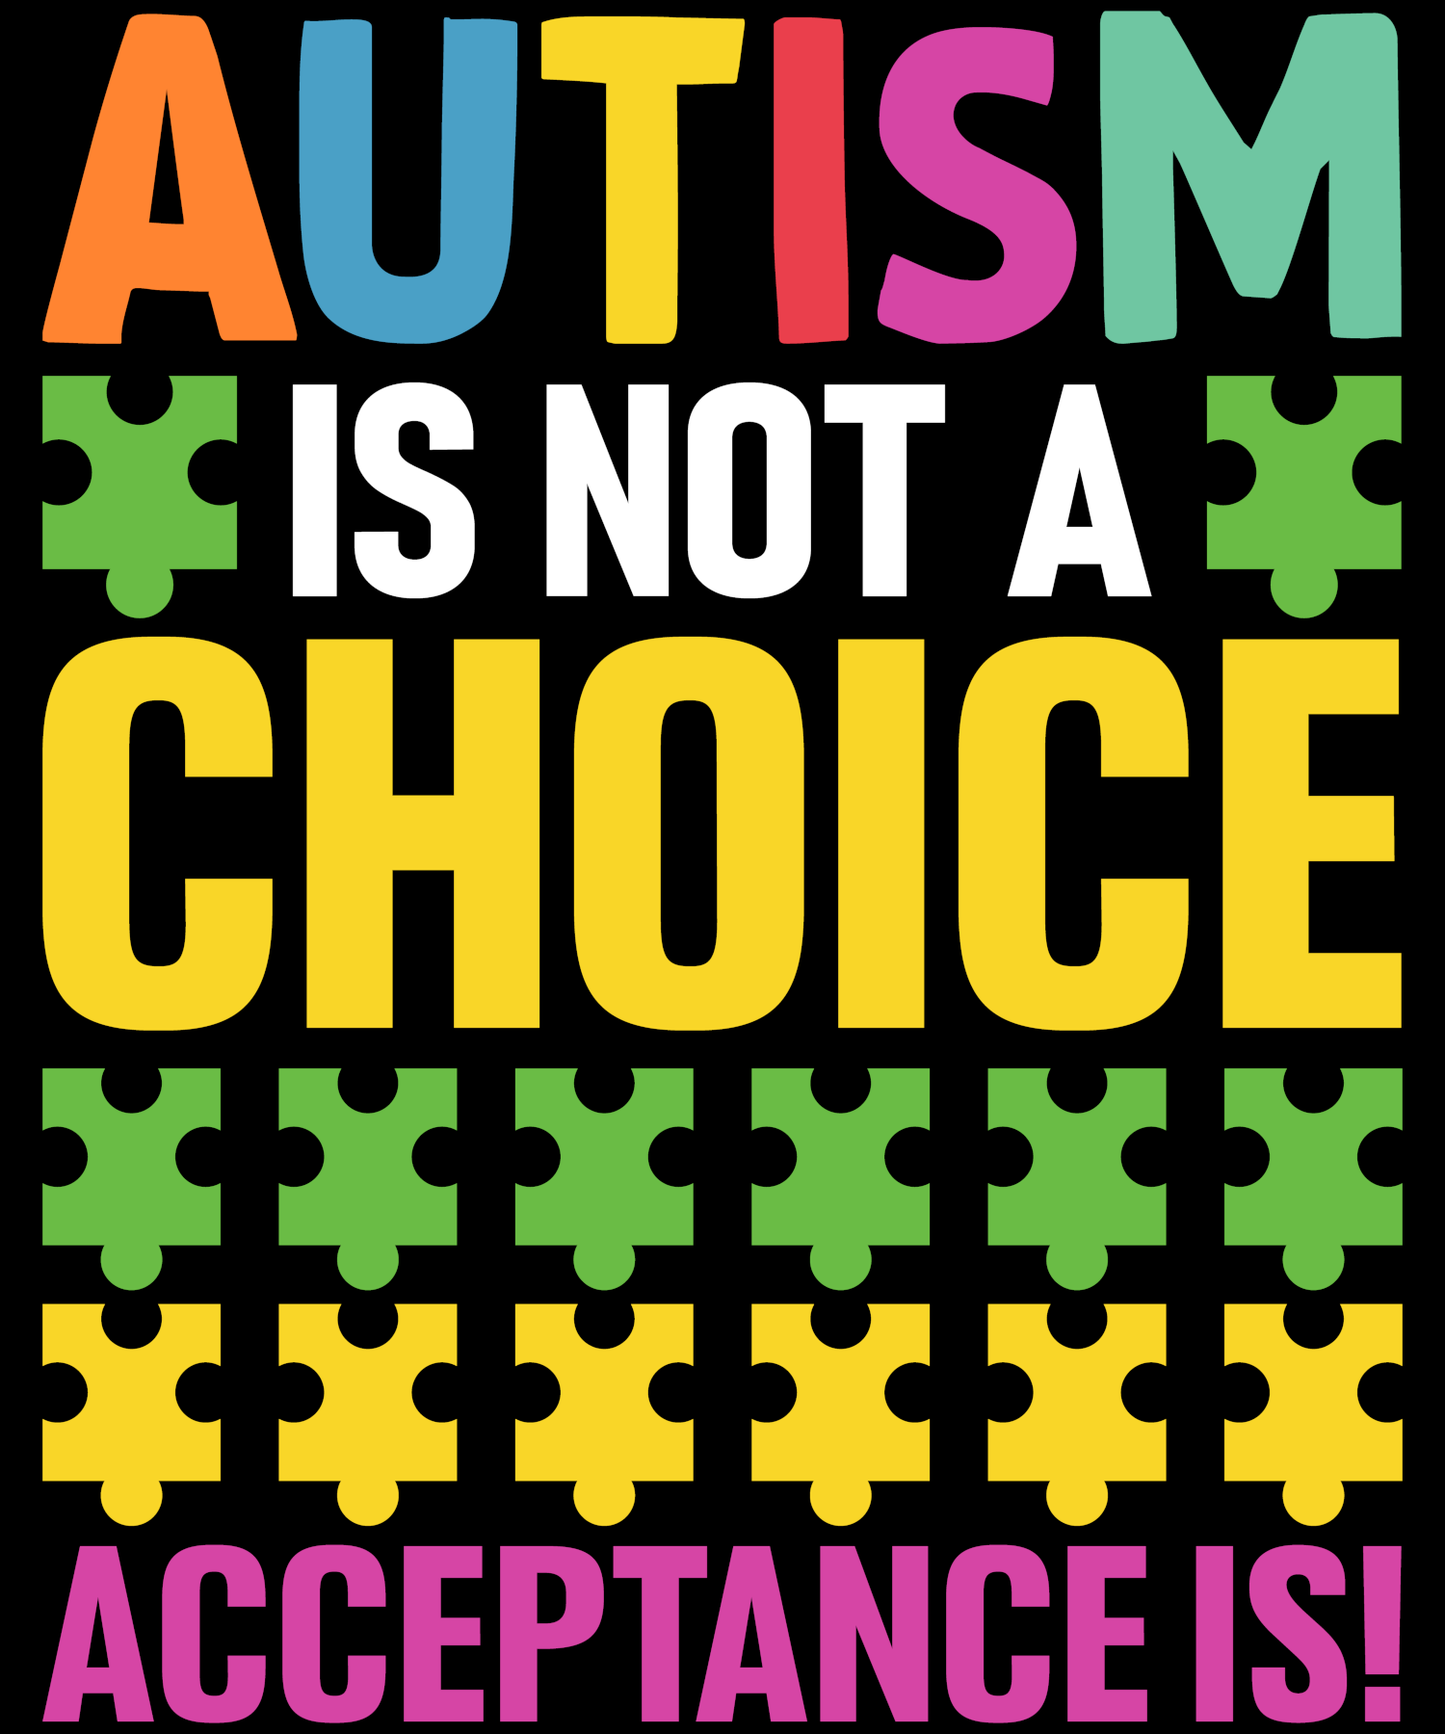 Autism Is Not A Choice Acceptance Is